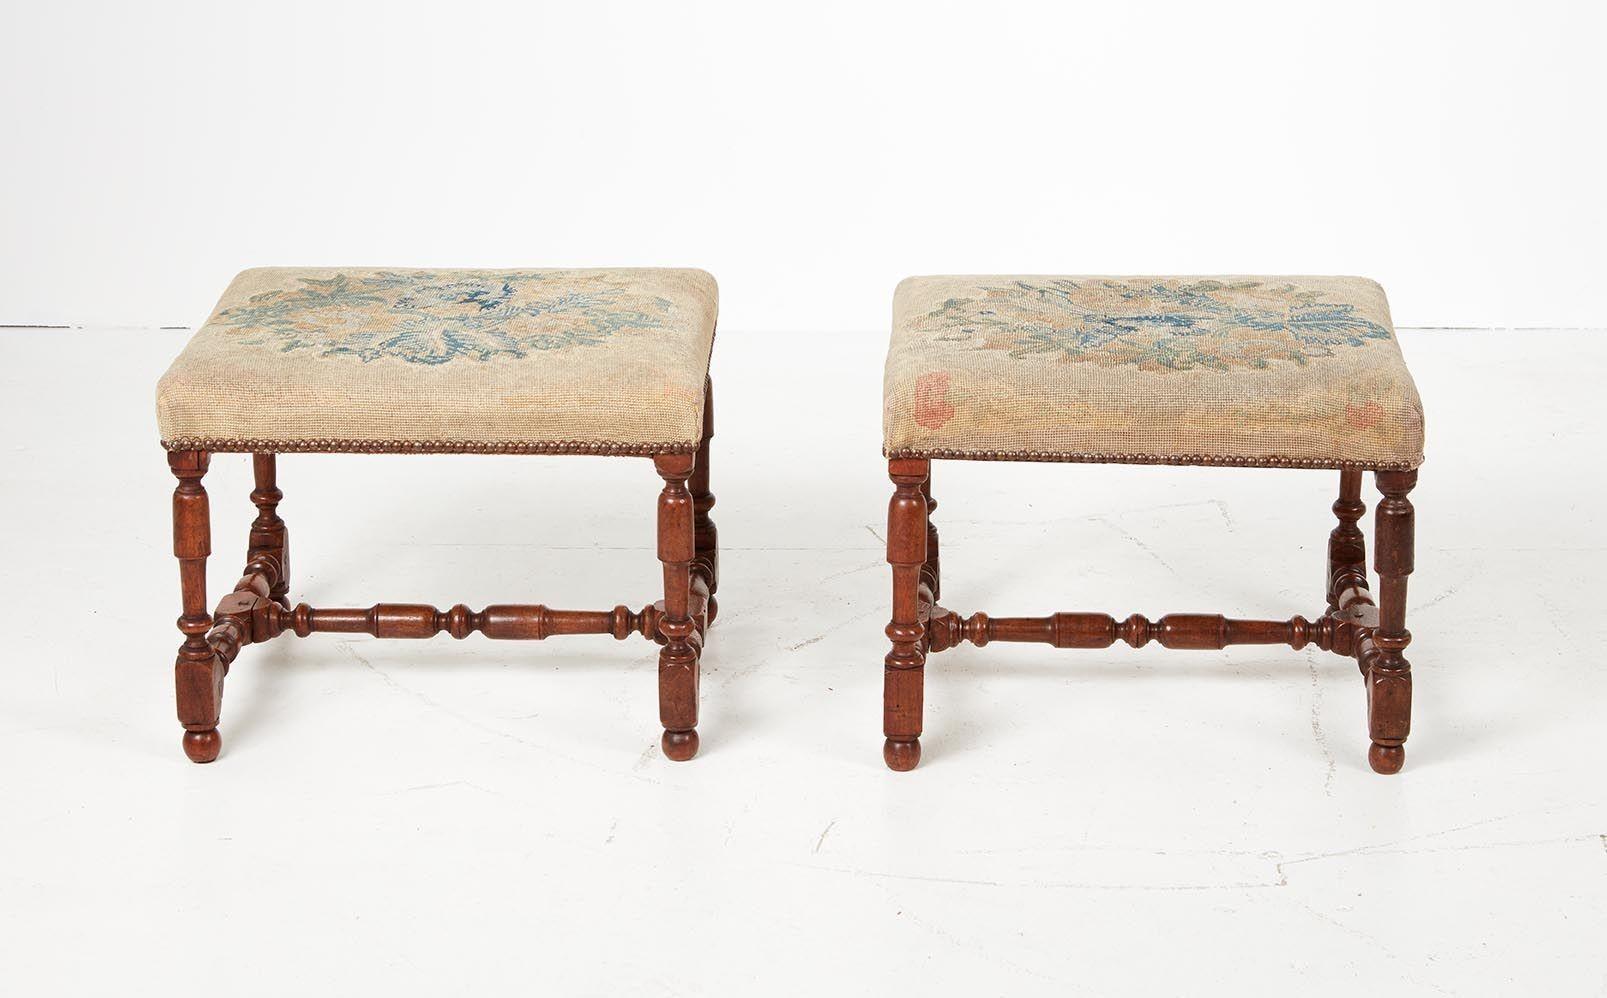 Late 17th Century A Rare Pair of Baroque Walnut Needlework Benches For Sale